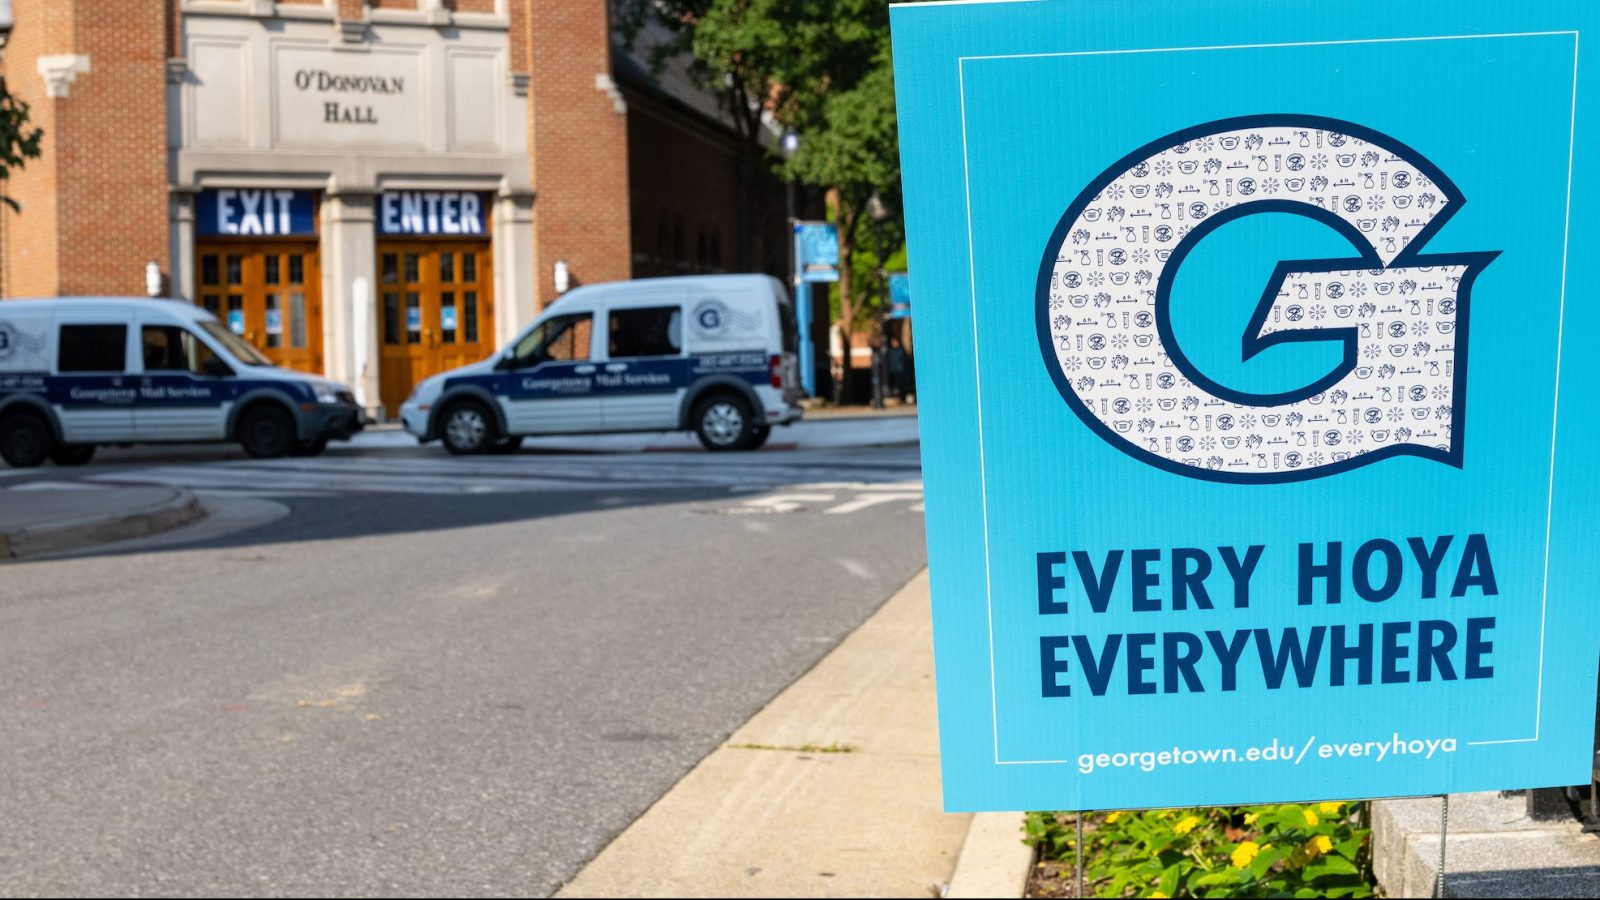 &quot;Every Hoya Everywhere&quot; blue sign in front of O&#039;Donovan Hall